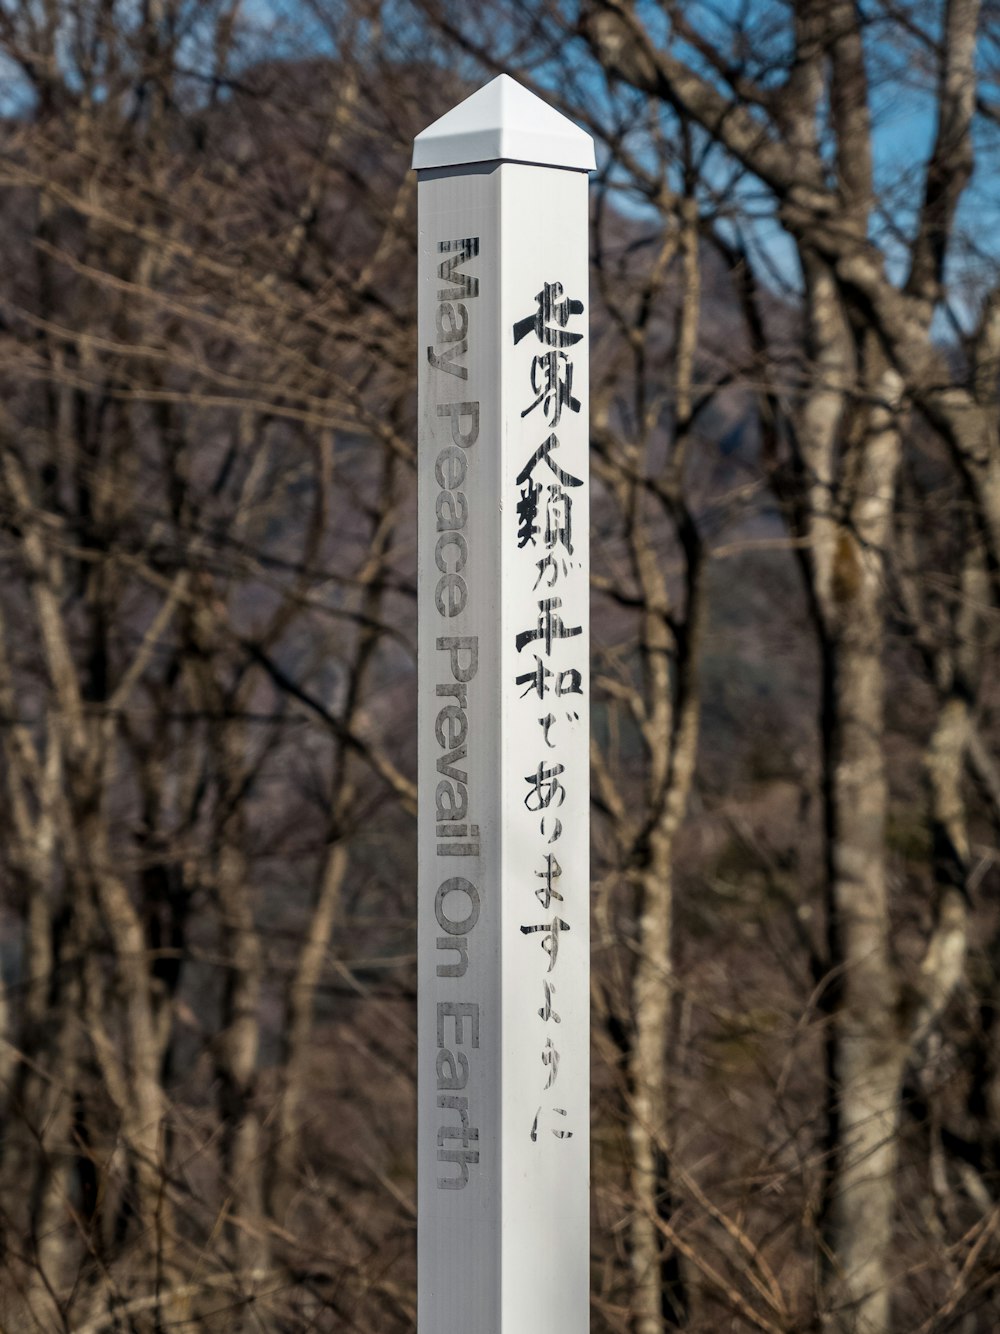 a sign in front of some trees with writing on it